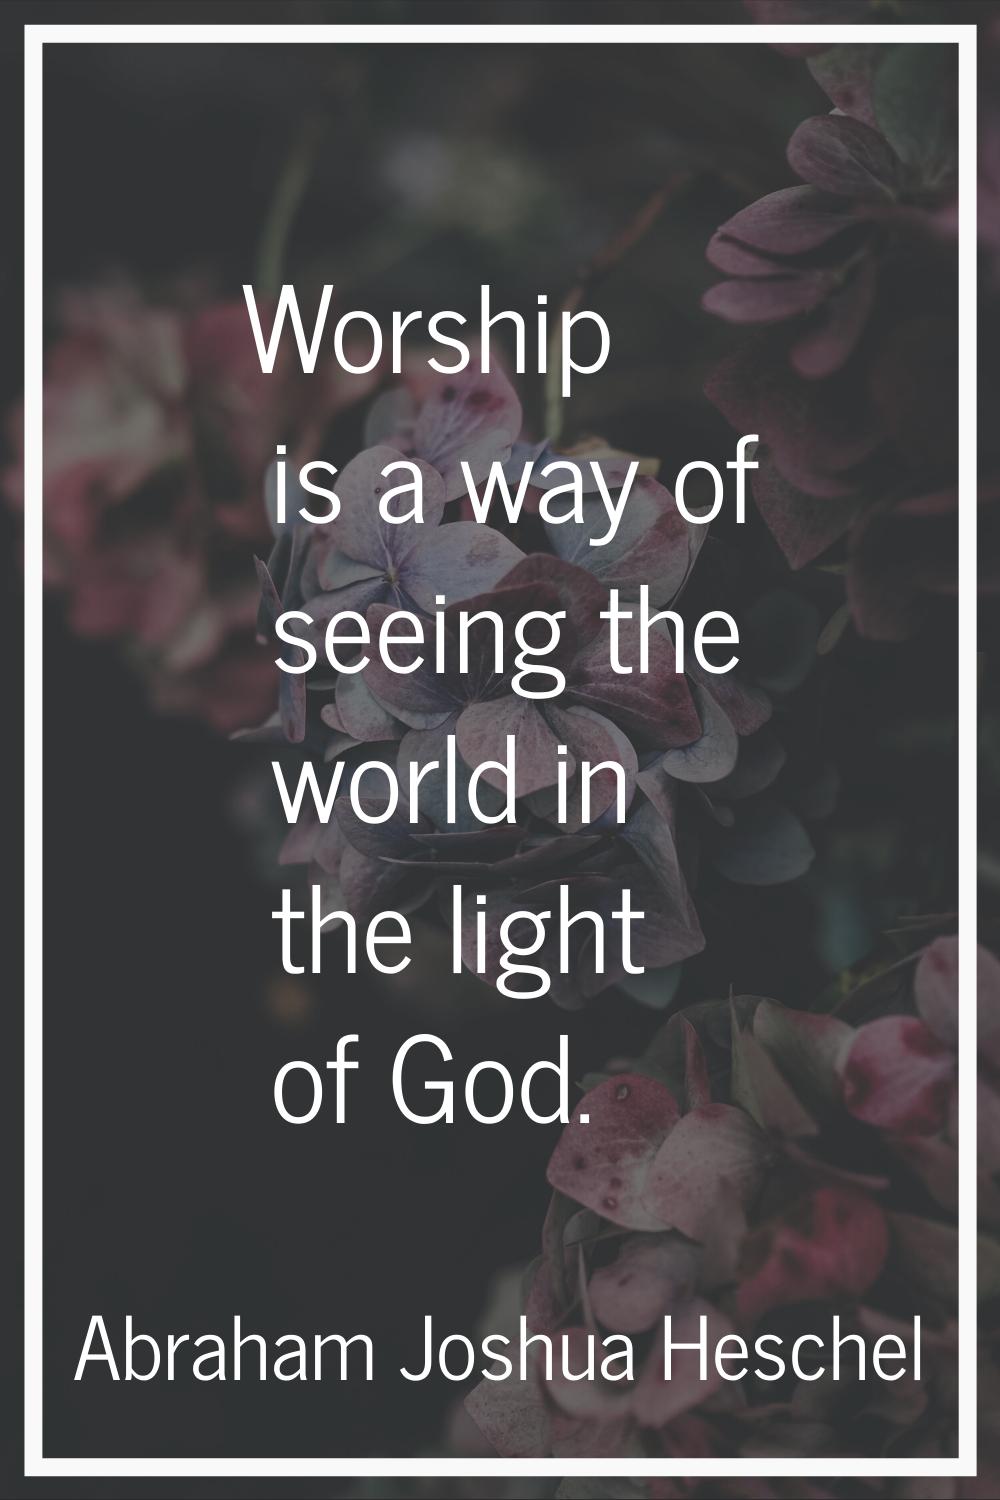 Worship is a way of seeing the world in the light of God.